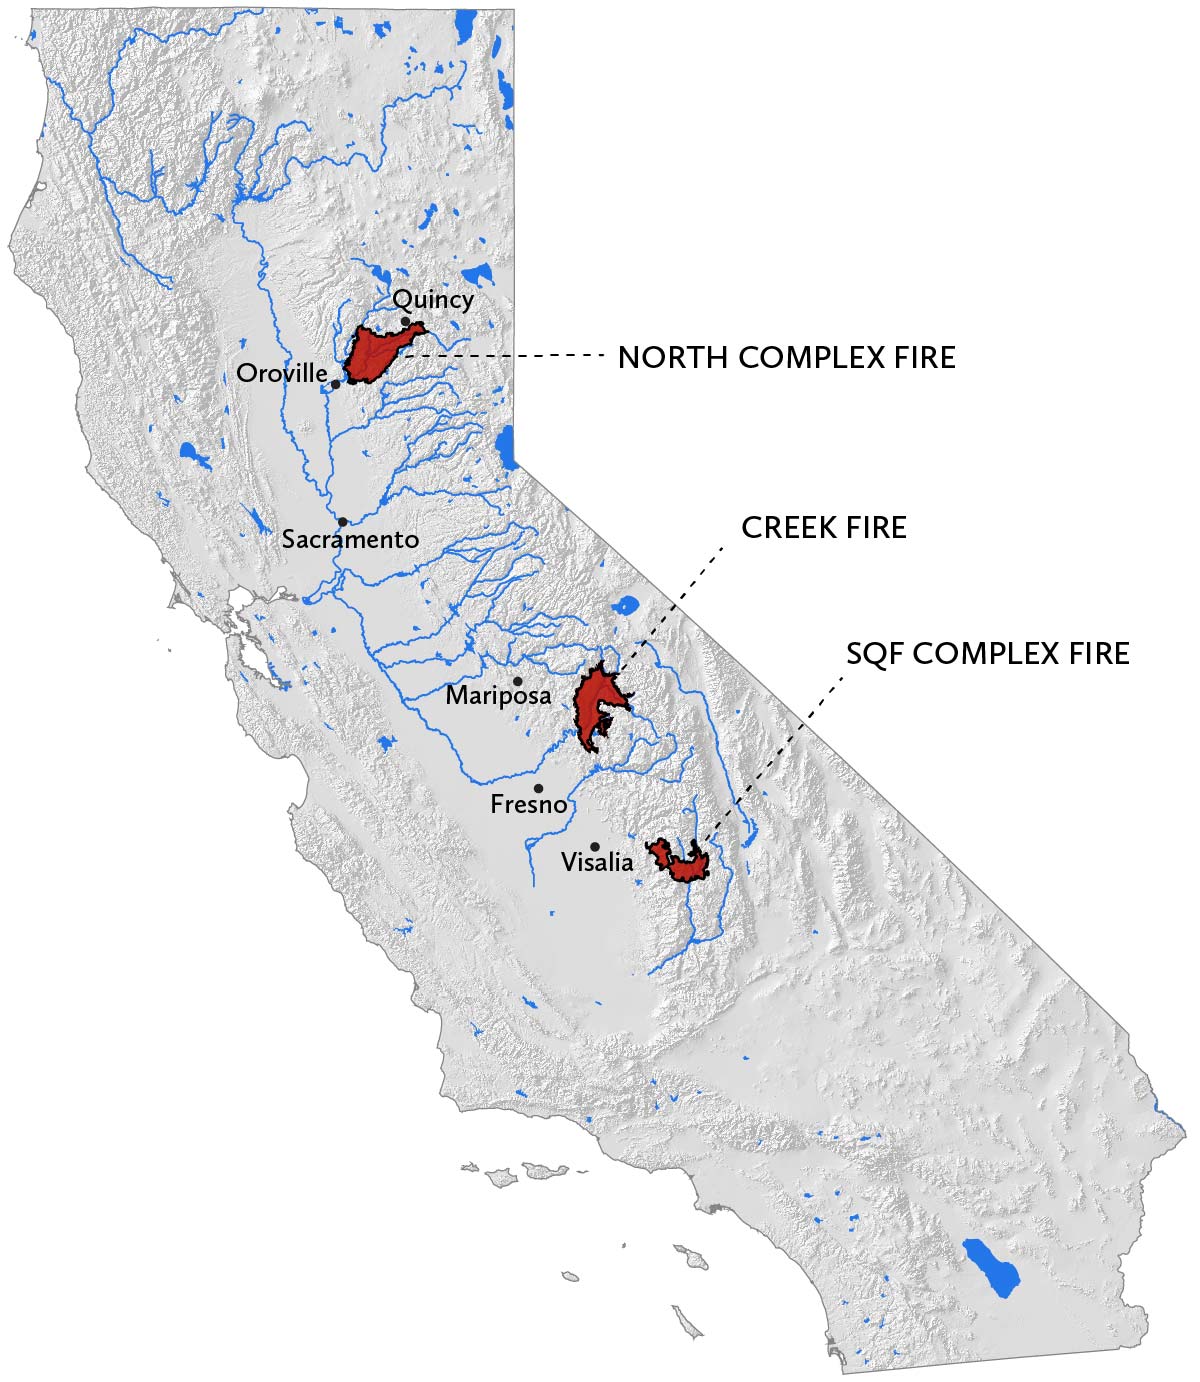 map of California showing the North Complex Fire near Oroville and Quincy, the Creek Fire northeast of Fresno, and the SQF Complex Fire east of Visalia.